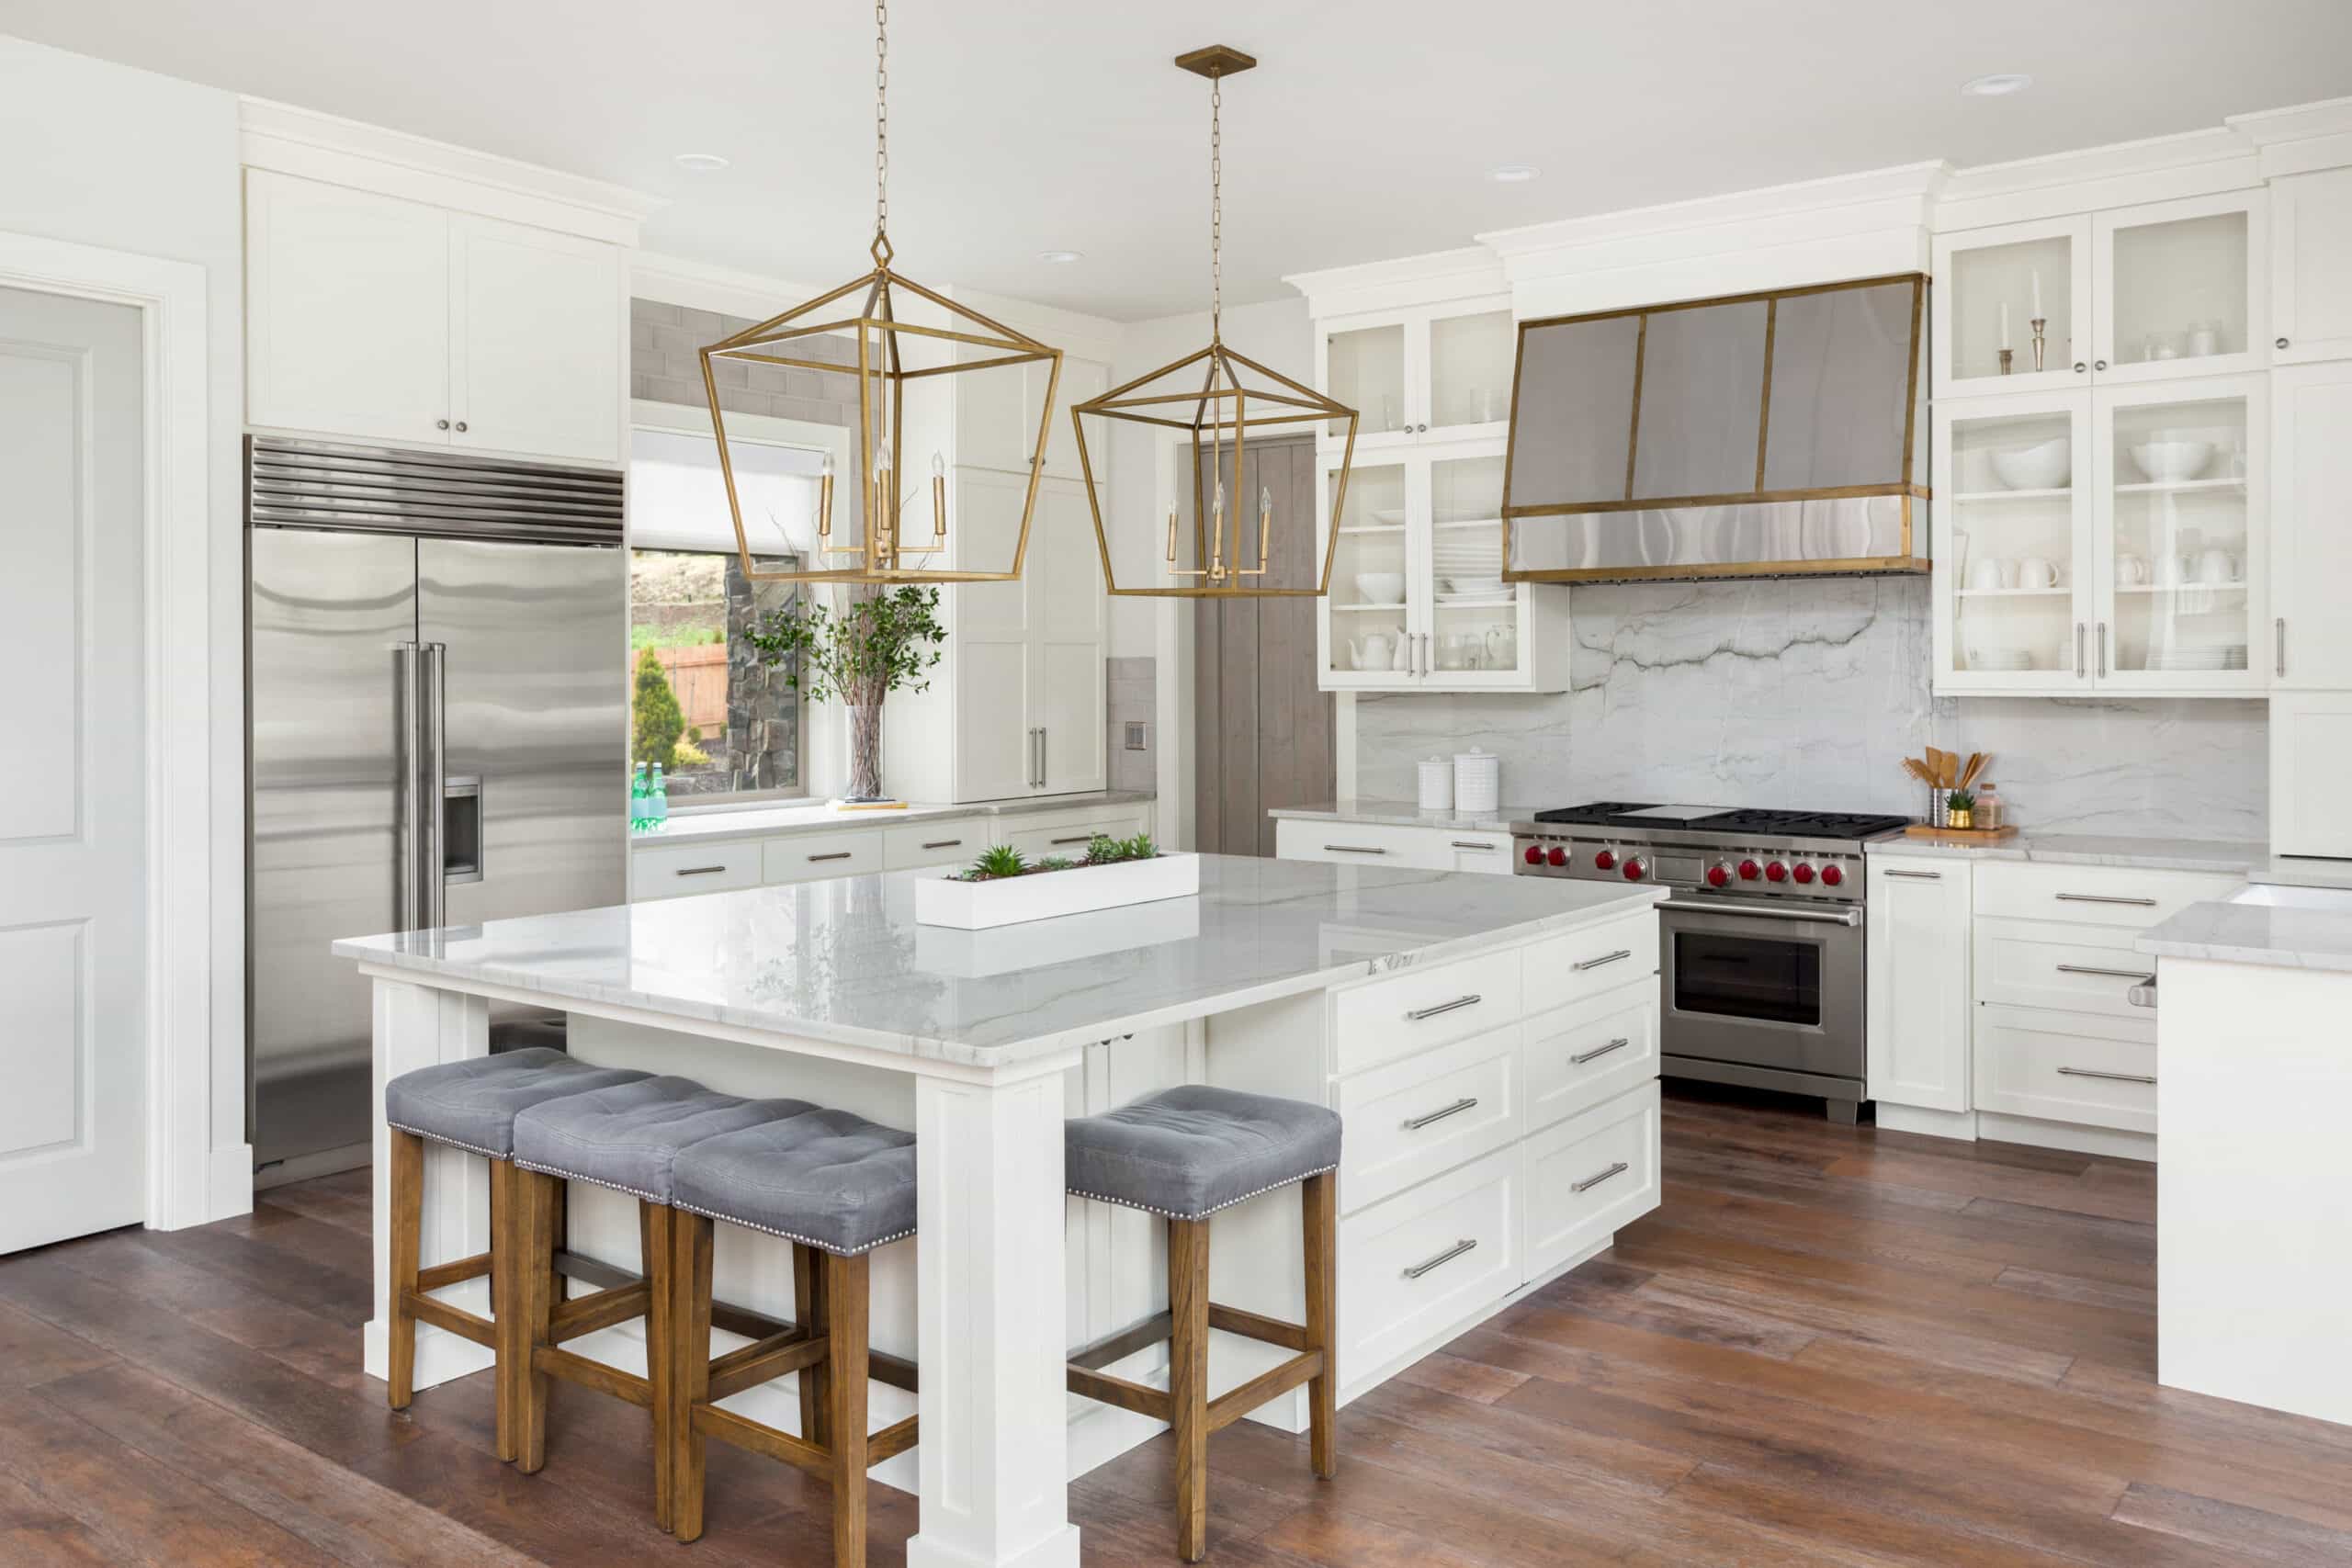 White luxury kitchen countertop and cabinet design with wood flooring